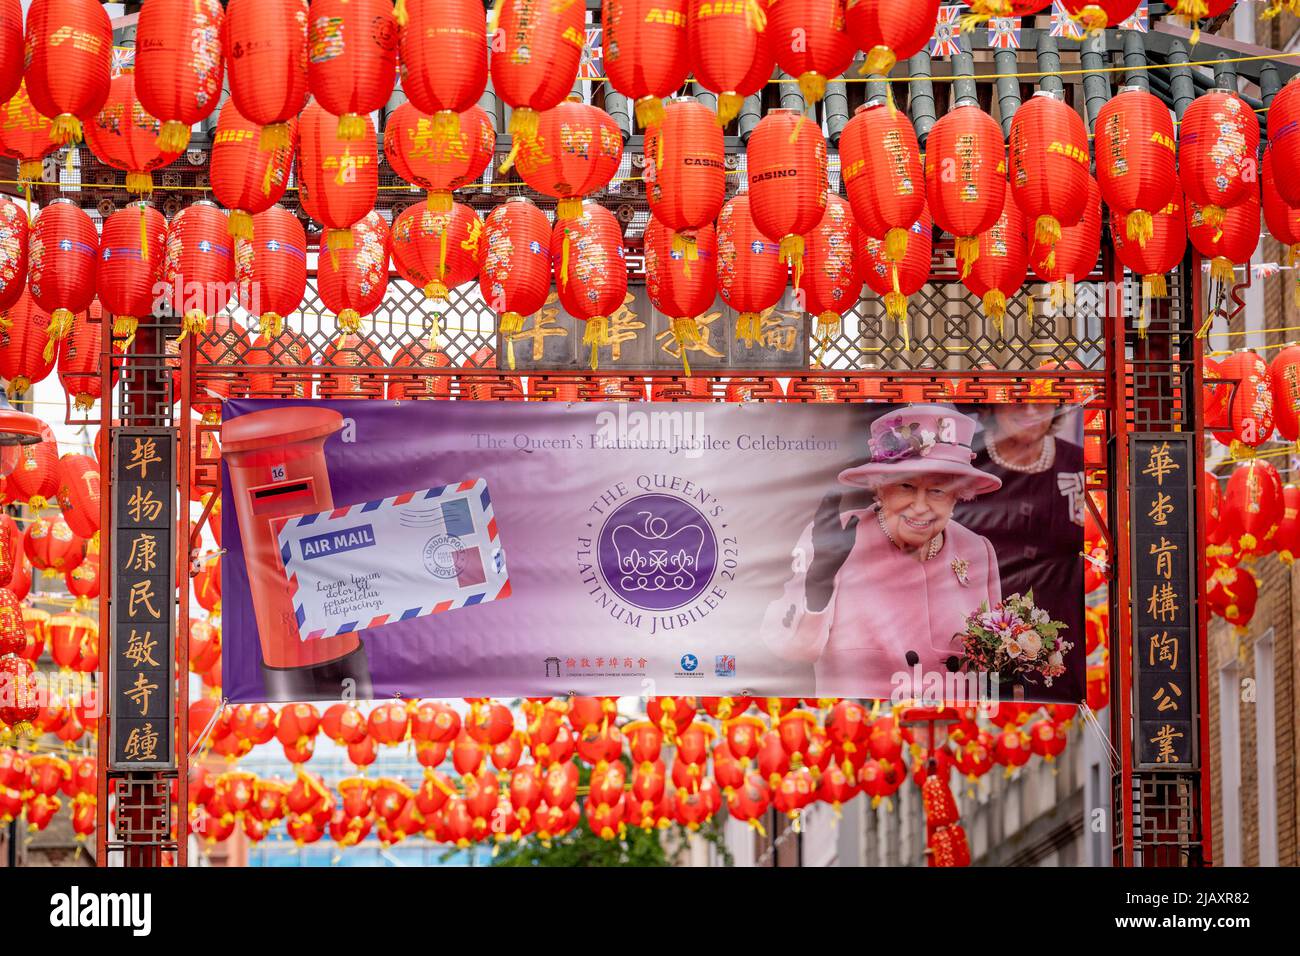 Days before the Queen's Platinum Jubilee celebrations commence over the Bank Holiday acros the UK, a banner showing her face hangs among Chinese lanterns on Garrard Street in the heart of the capital's Chinatown, on 1st June 2022 in London, England. Queen Elizabeth II has been on the UK throne for 70 years, the longest-serving monarch in English history and Union Jack flags can be seen everywhere around the country in the week before the Jubilee weekend. Stock Photo